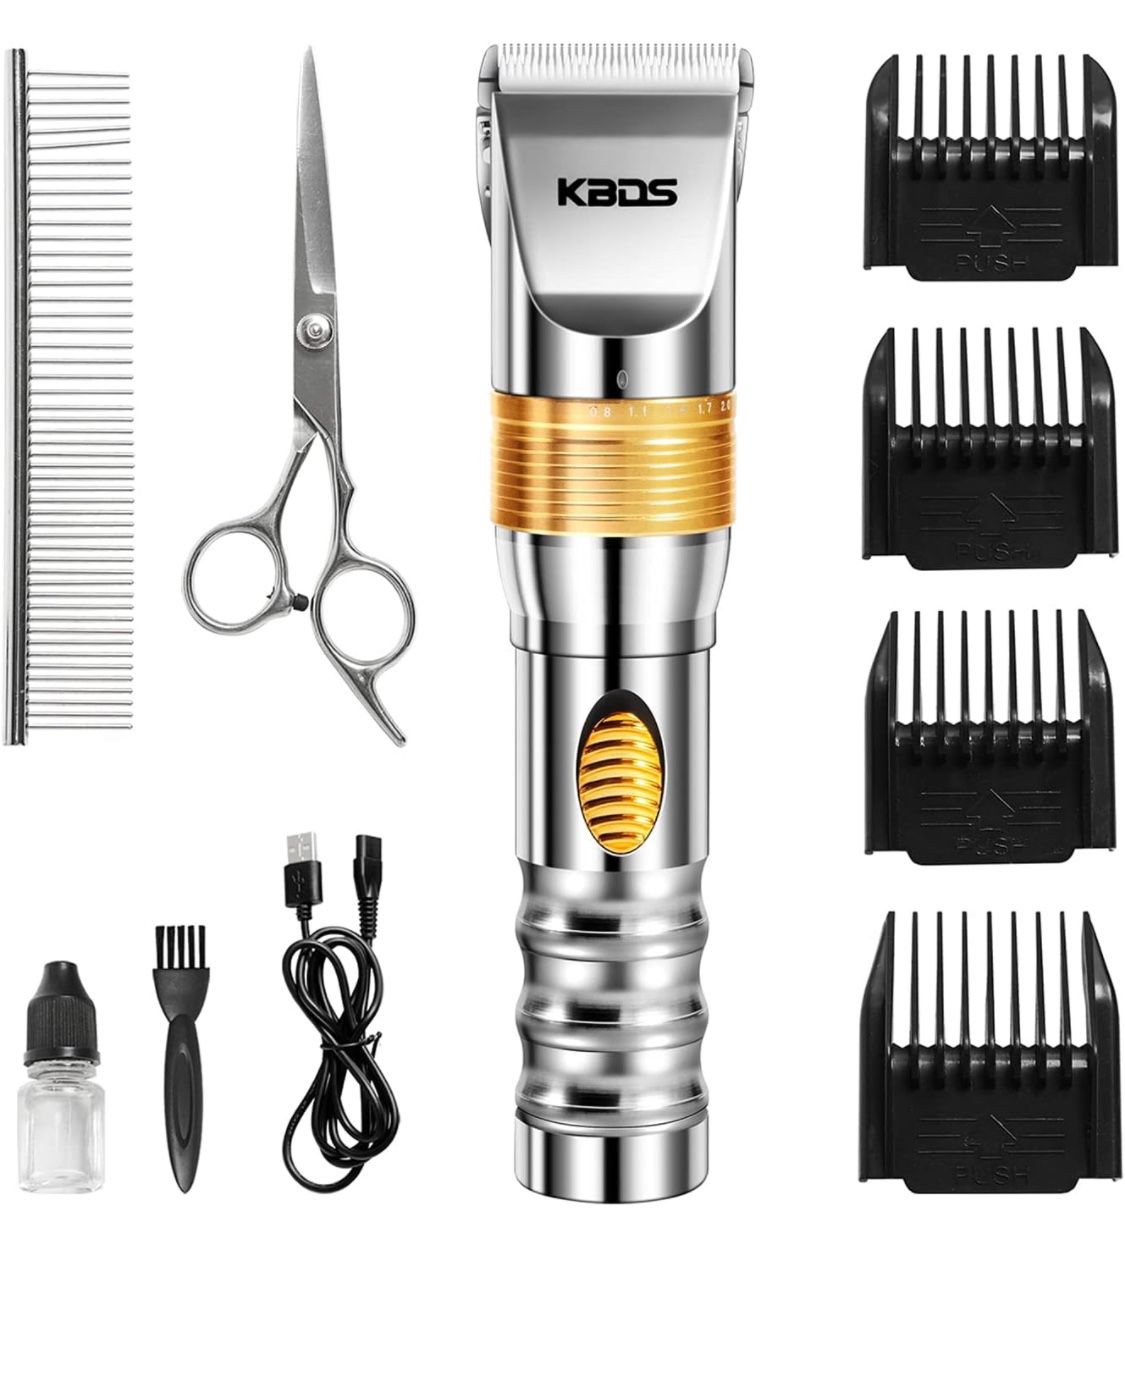 Pet Grooming Clippers Upgrade - USB Rechargeable Dog Shaver Clippers Portable Pet Hair Clipper Super Quiet Cat Grooming Set Easy Cut Safety Guard for 